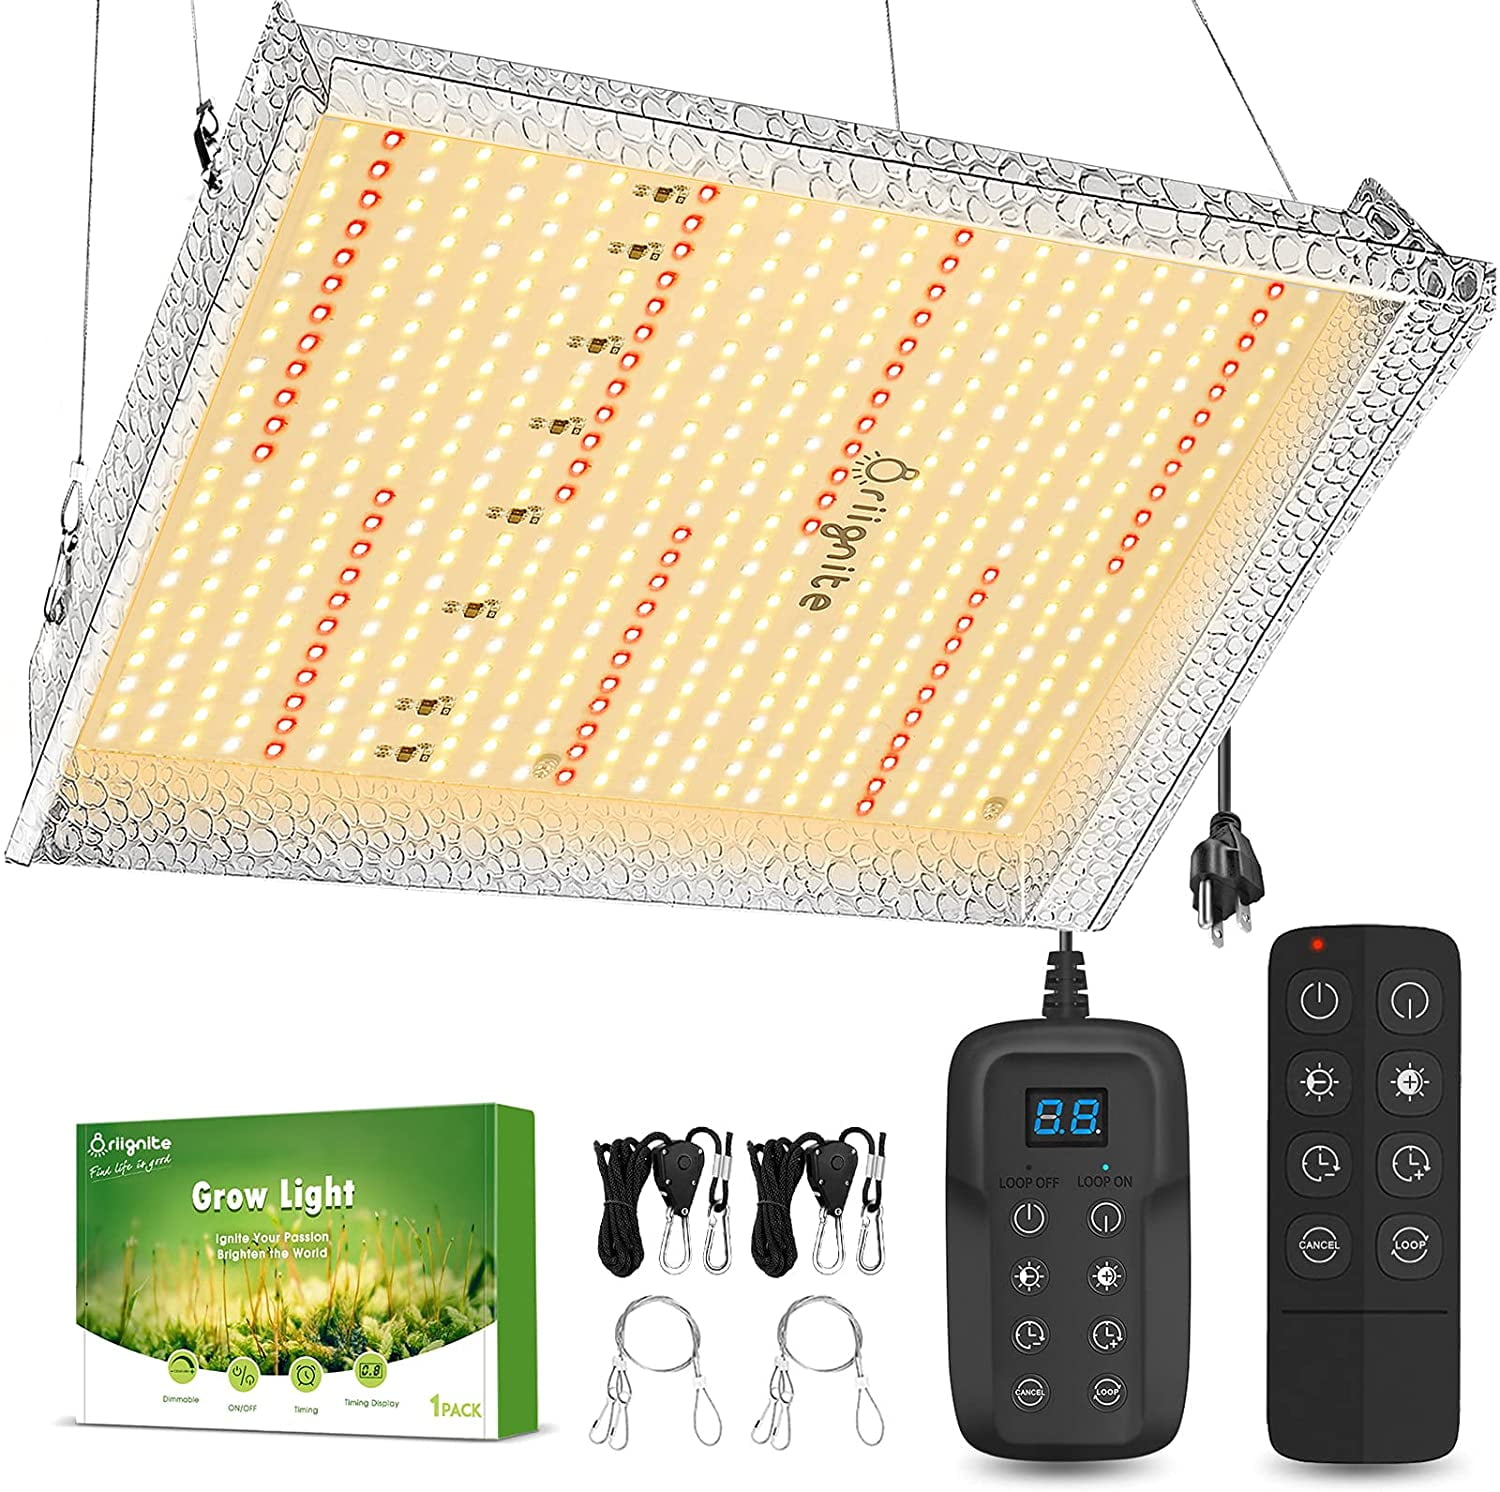 Details about   48"x24"x60" Grow Tent Indoor Full Spectrum LED Grow Light 1000W Hydroponics 